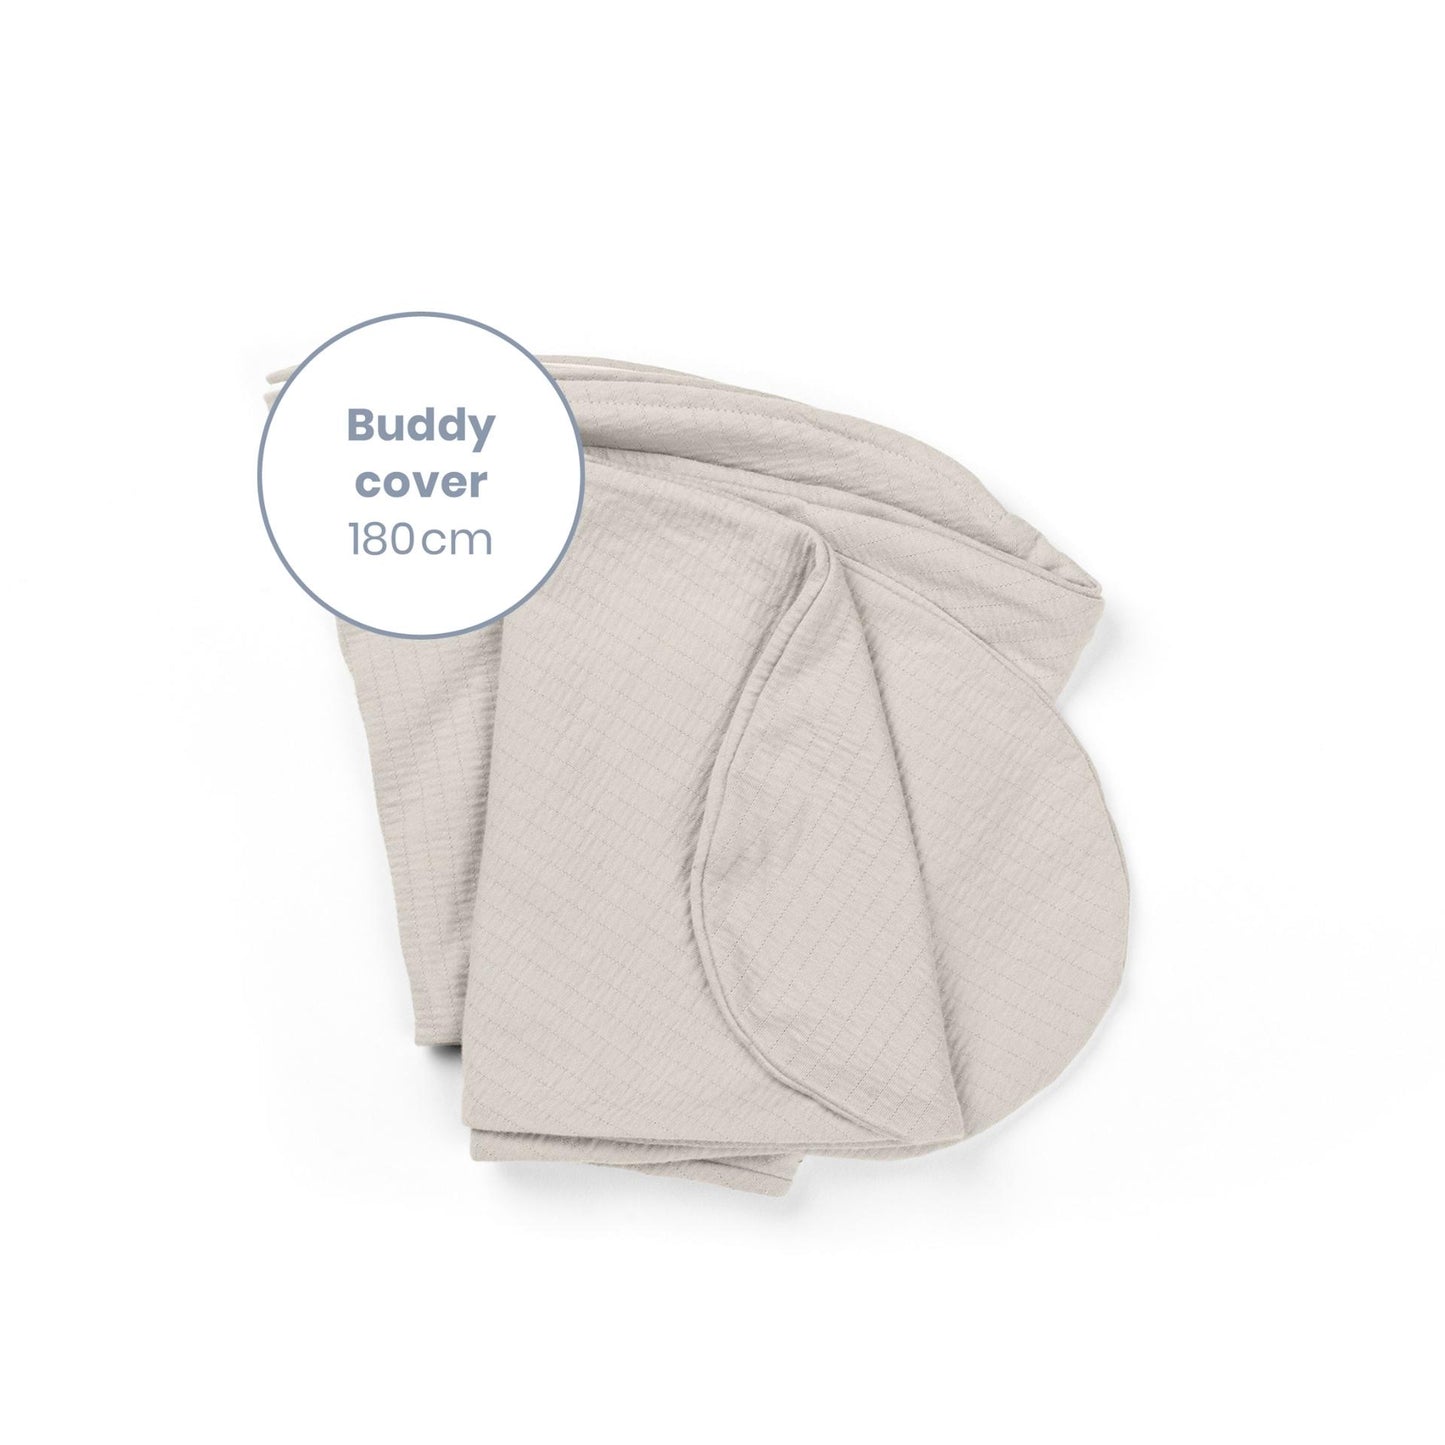 Cover for large maternity pillow tetra jersey sand